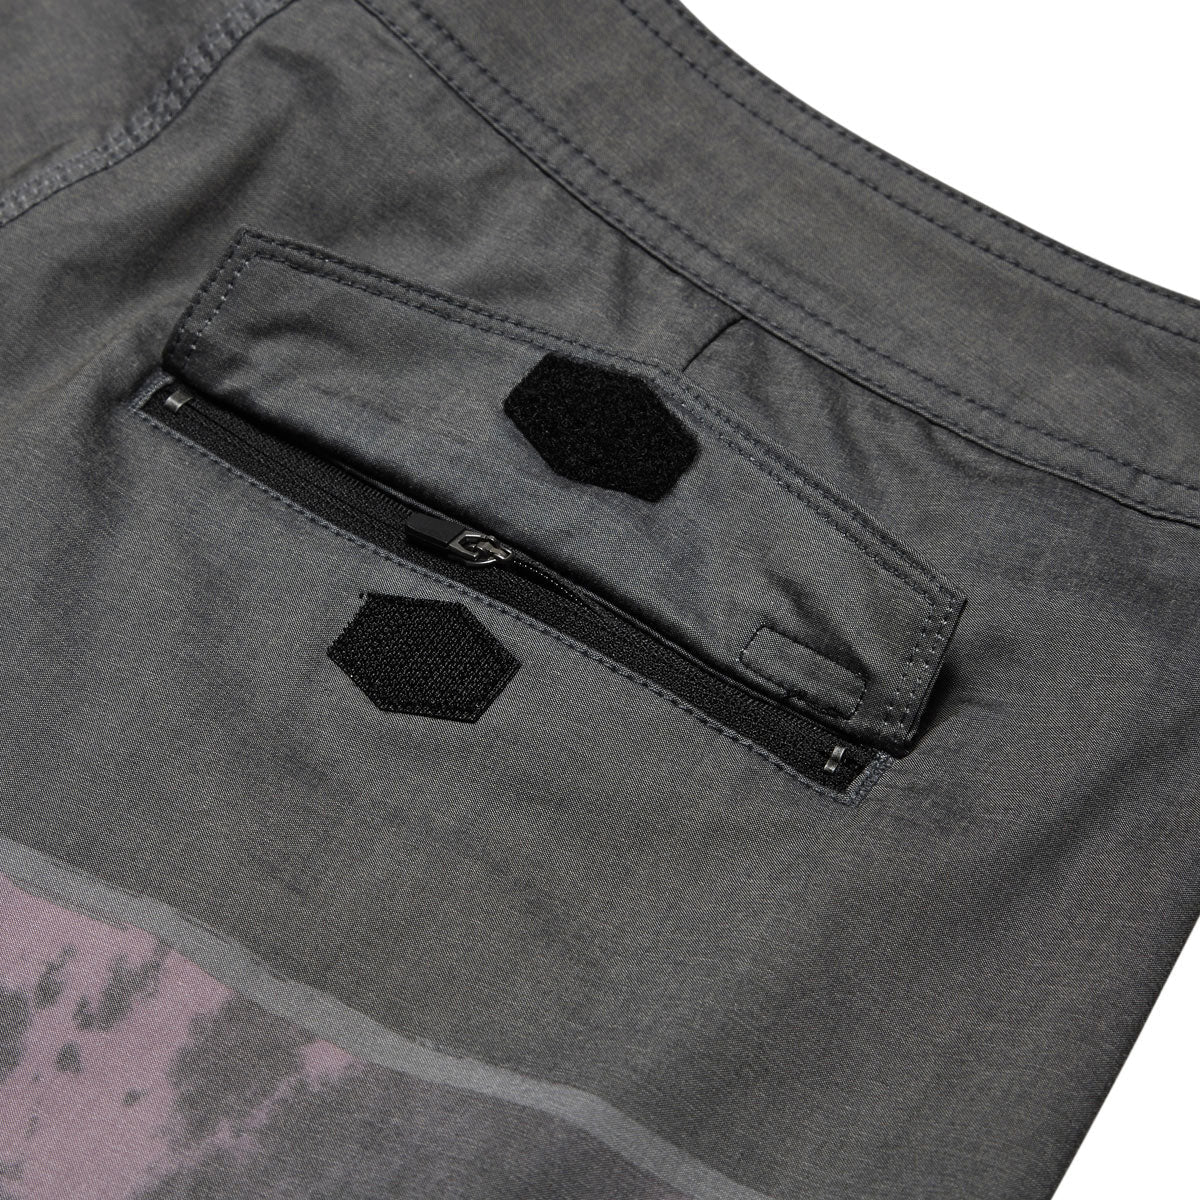 RVCA County Trunk Shorts - Lavender image 3